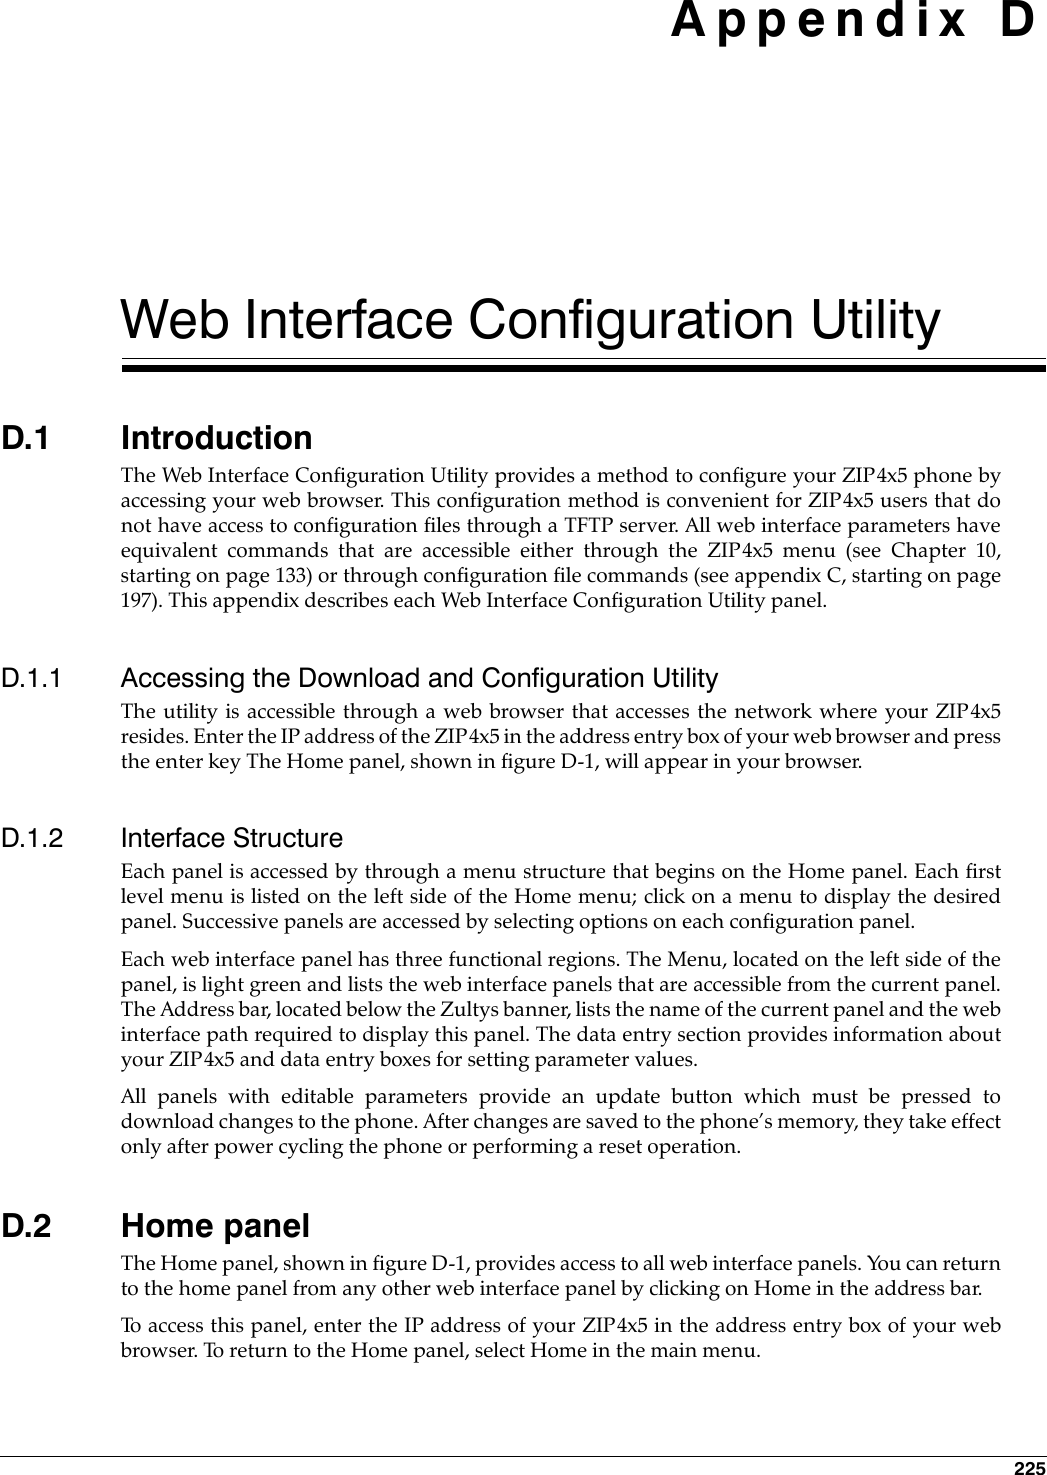 225 Appendix DWeb Interface Configuration UtilityD.1 IntroductionThe Web Interface Configuration Utility provides a method to configure your ZIP4x5 phone byaccessing your web browser. This configuration method is convenient for ZIP4x5 users that donot have access to configuration files through a TFTP server. All web interface parameters haveequivalent commands that are accessible either through the ZIP4x5 menu (see Chapter 10,starting on page 133) or through configuration file commands (see appendix C, starting on page197). This appendix describes each Web Interface Configuration Utility panel.D.1.1 Accessing the Download and Configuration UtilityThe utility is accessible through a web browser that accesses the network where your ZIP4x5resides. Enter the IP address of the ZIP4x5 in the address entry box of your web browser and pressthe enter key The Home panel, shown in figure D-1, will appear in your browser.D.1.2 Interface StructureEach panel is accessed by through a menu structure that begins on the Home panel. Each firstlevel menu is listed on the left side of the Home menu; click on a menu to display the desiredpanel. Successive panels are accessed by selecting options on each configuration panel.Each web interface panel has three functional regions. The Menu, located on the left side of thepanel, is light green and lists the web interface panels that are accessible from the current panel.The Address bar, located below the Zultys banner, lists the name of the current panel and the webinterface path required to display this panel. The data entry section provides information aboutyour ZIP4x5 and data entry boxes for setting parameter values. All panels with editable parameters provide an update button which must be pressed todownload changes to the phone. After changes are saved to the phone’s memory, they take effectonly after power cycling the phone or performing a reset operation.D.2 Home panelThe Home panel, shown in figure D-1, provides access to all web interface panels. You can returnto the home panel from any other web interface panel by clicking on Home in the address bar.To access this panel, enter the IP address of your ZIP4x5 in the address entry box of your webbrowser. To return to the Home panel, select Home in the main menu.